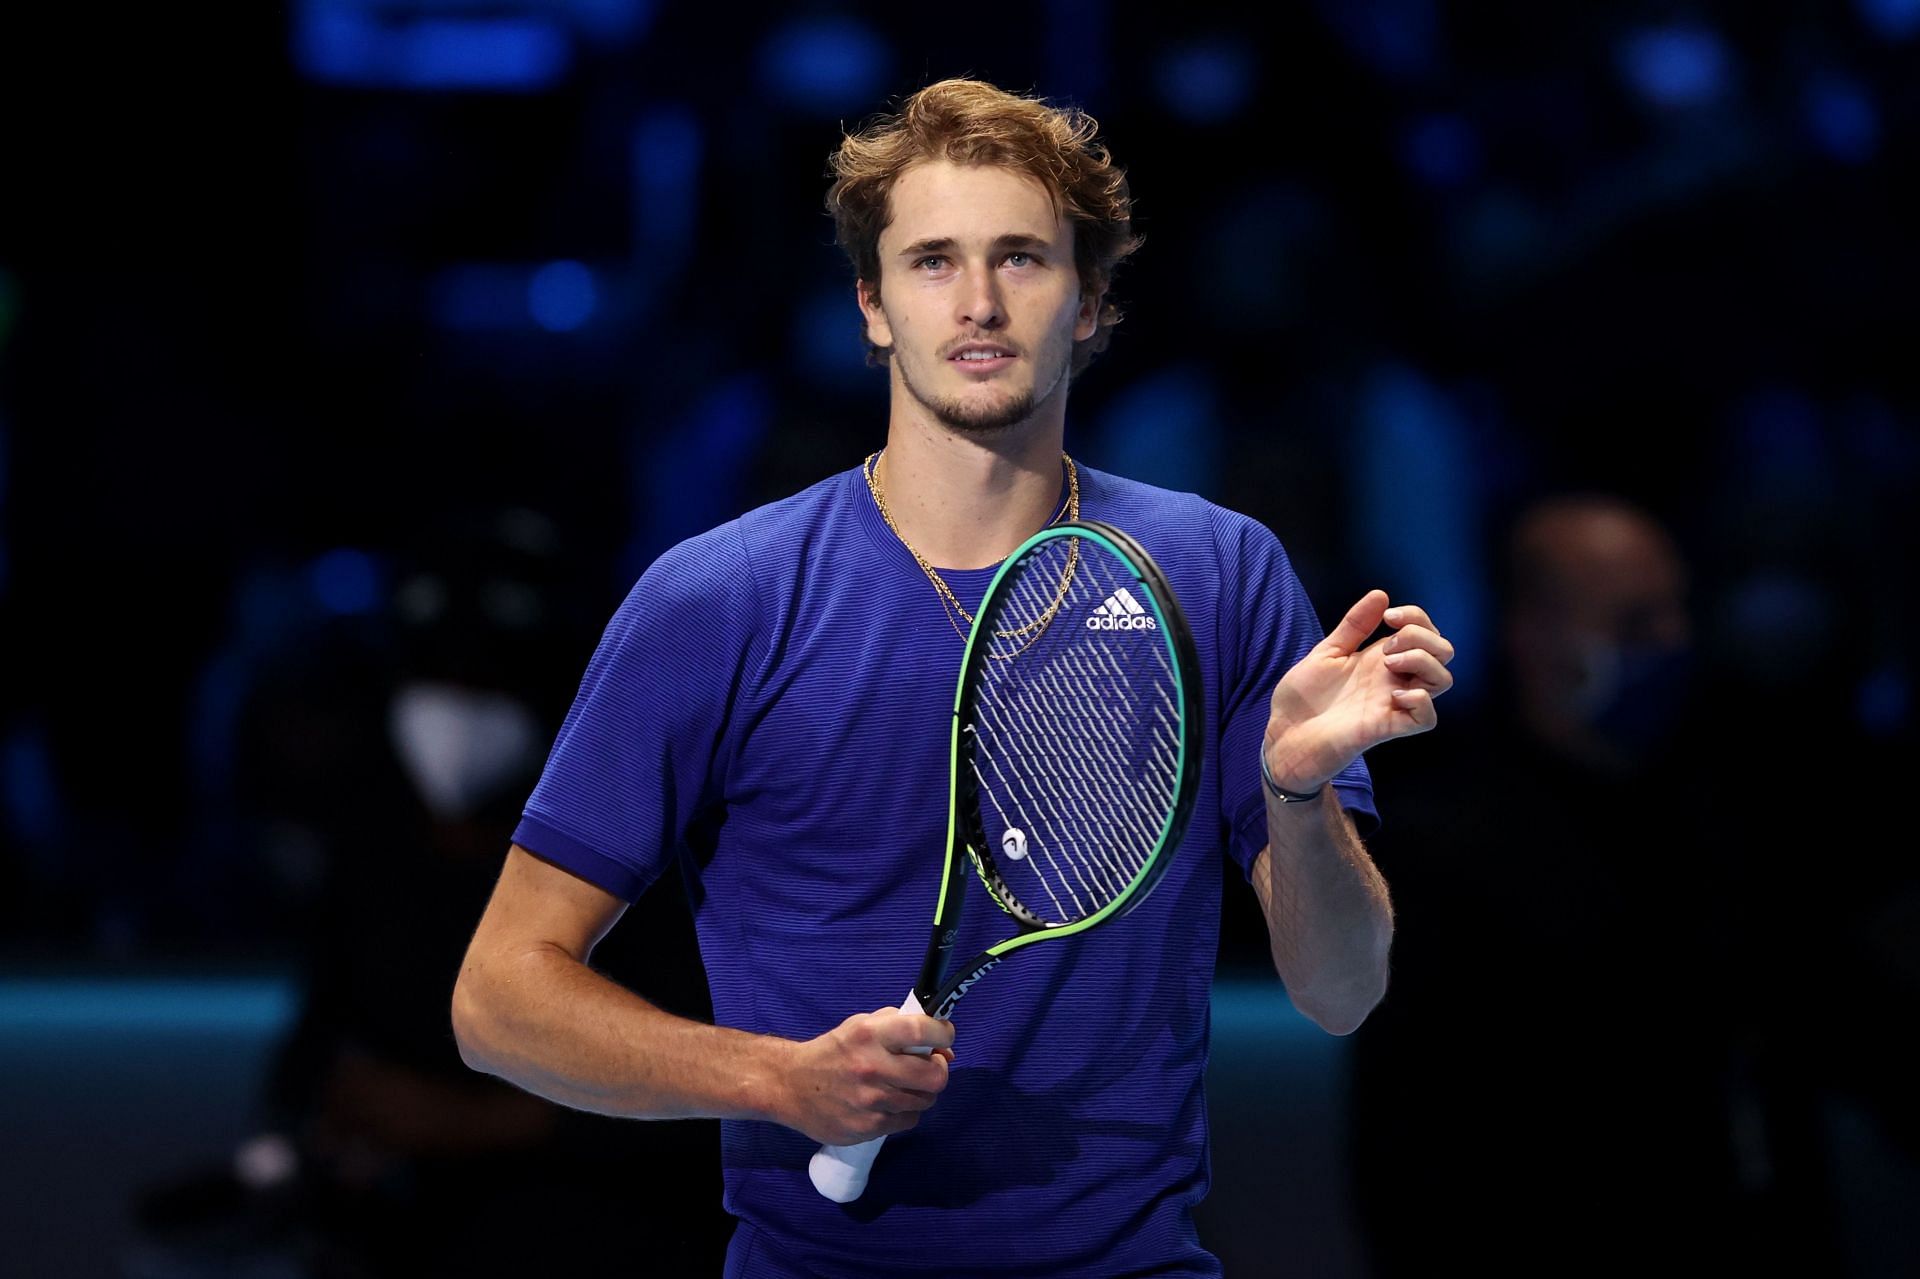 Nitto ATP World Tour Finals - Alexander Zverev acknowledges the crowd after his win over Hurkacz on Thursday